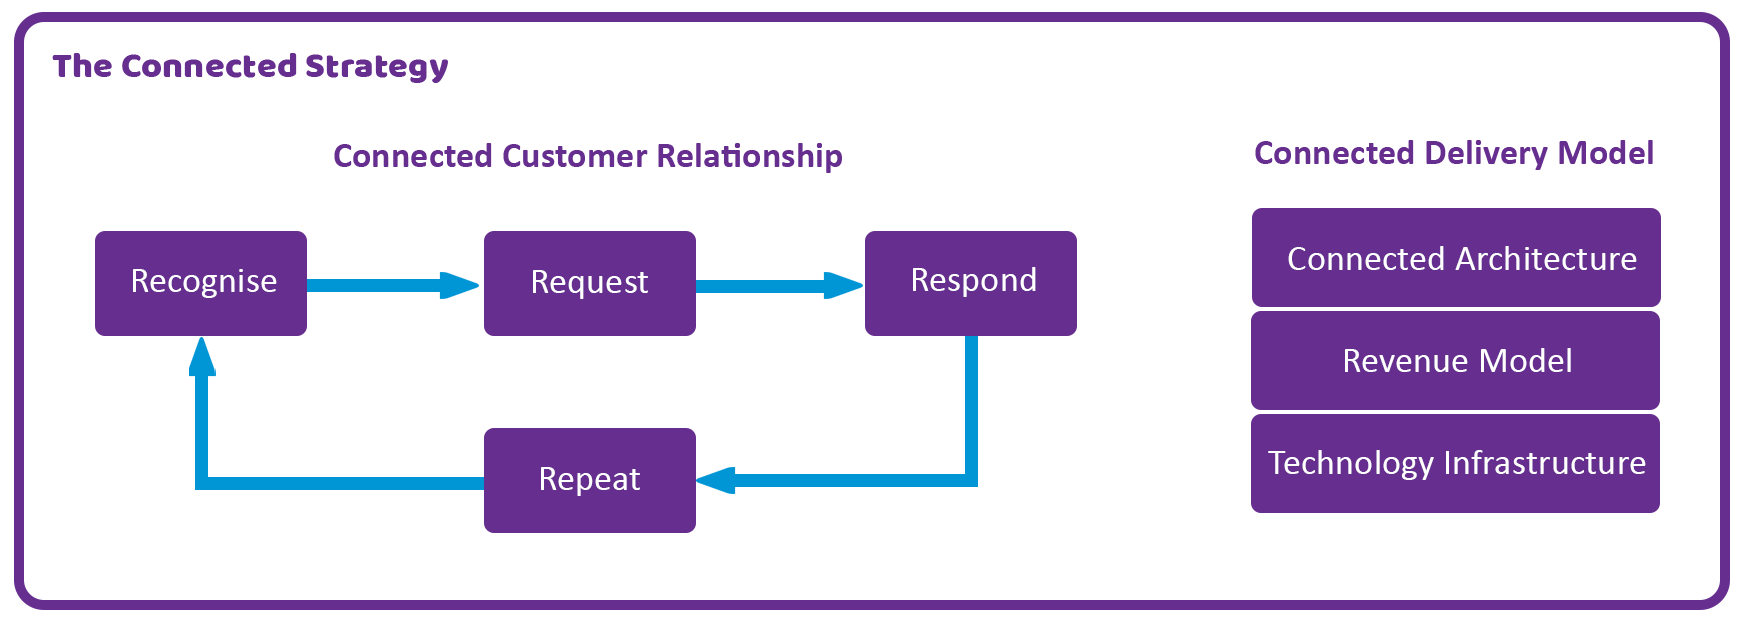 The Connected Strategy Diagram